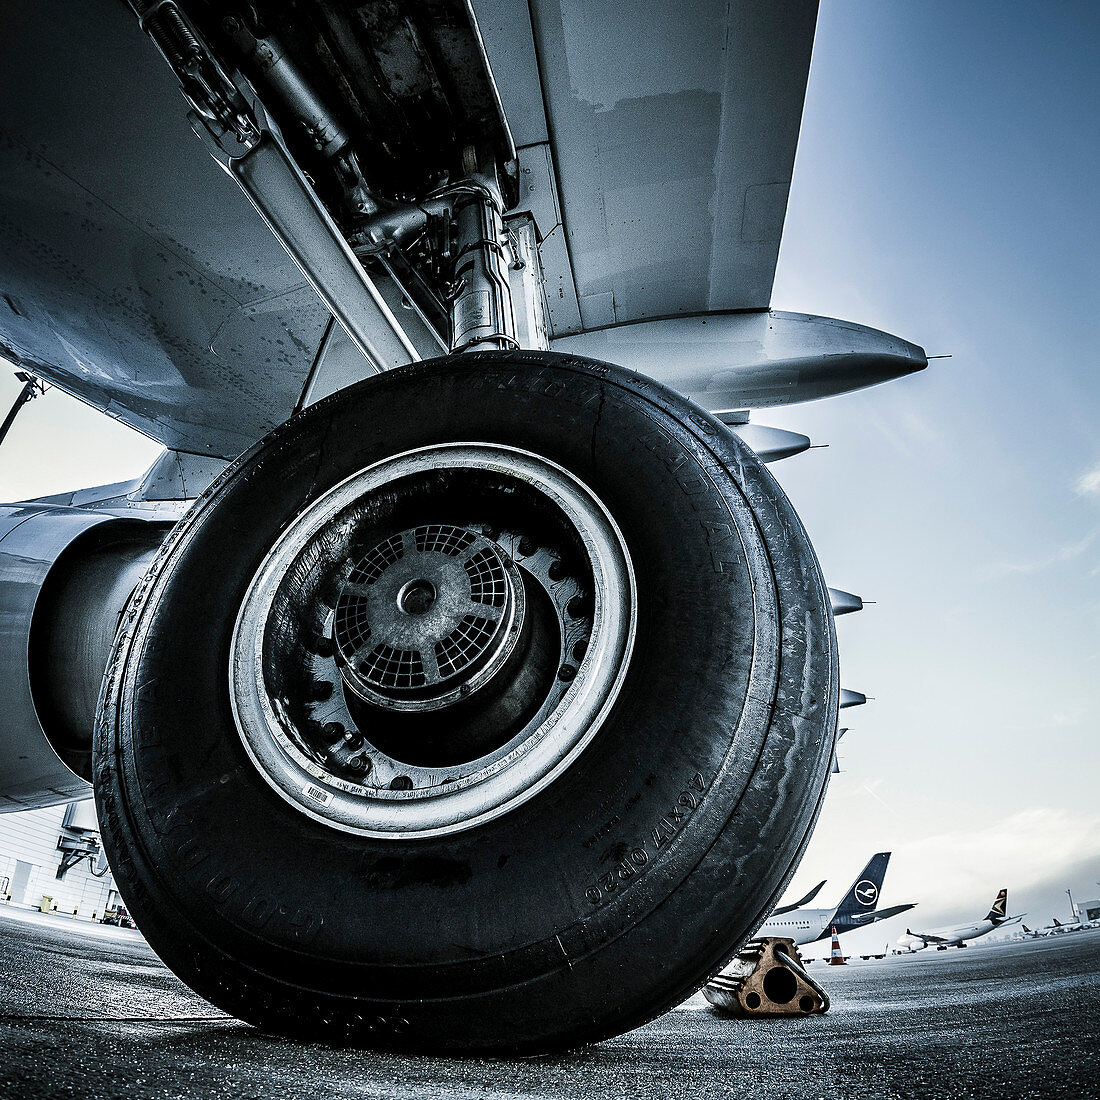 The tire of an Airbus A320-200 in the parking position at Munich Airport